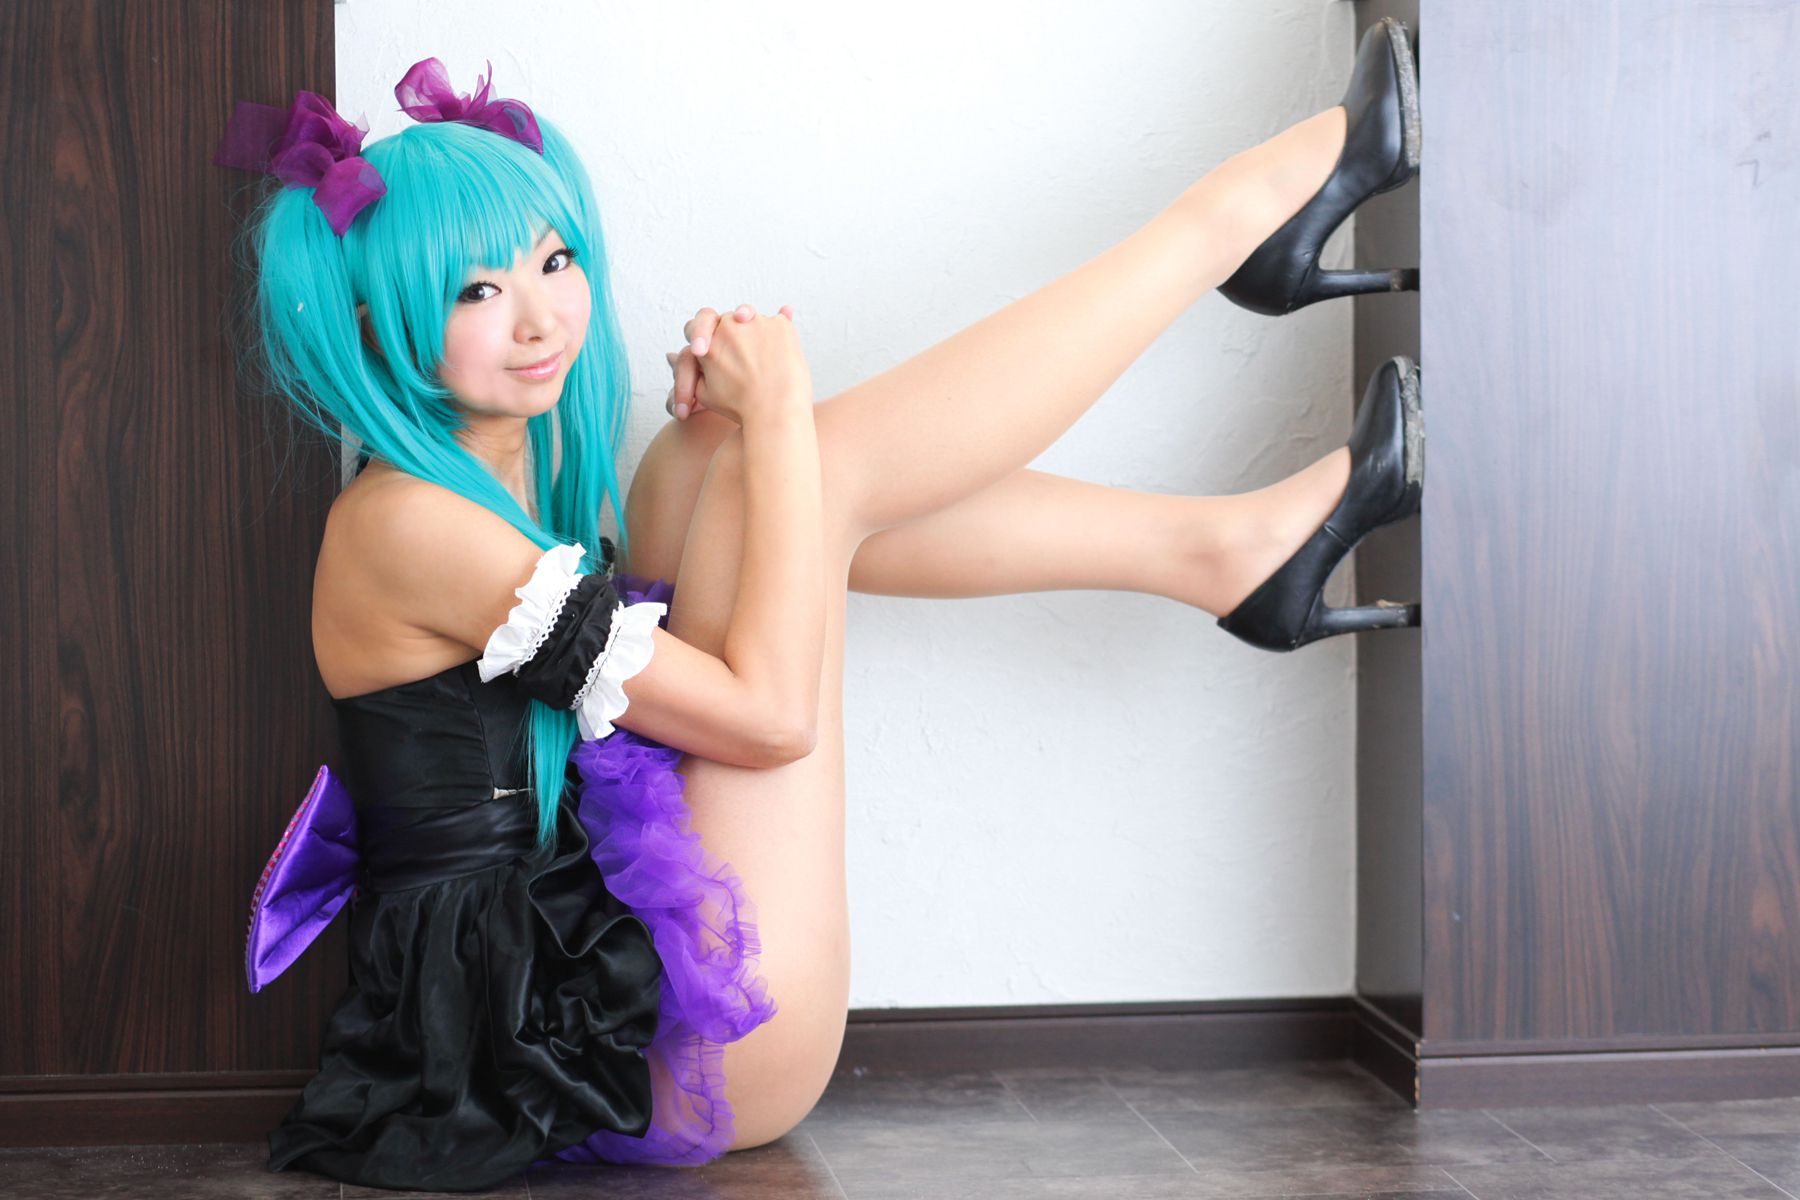 taotuhome[Cosplay] Necoco as Hatsune Miku from Vocaloid 套图第156张